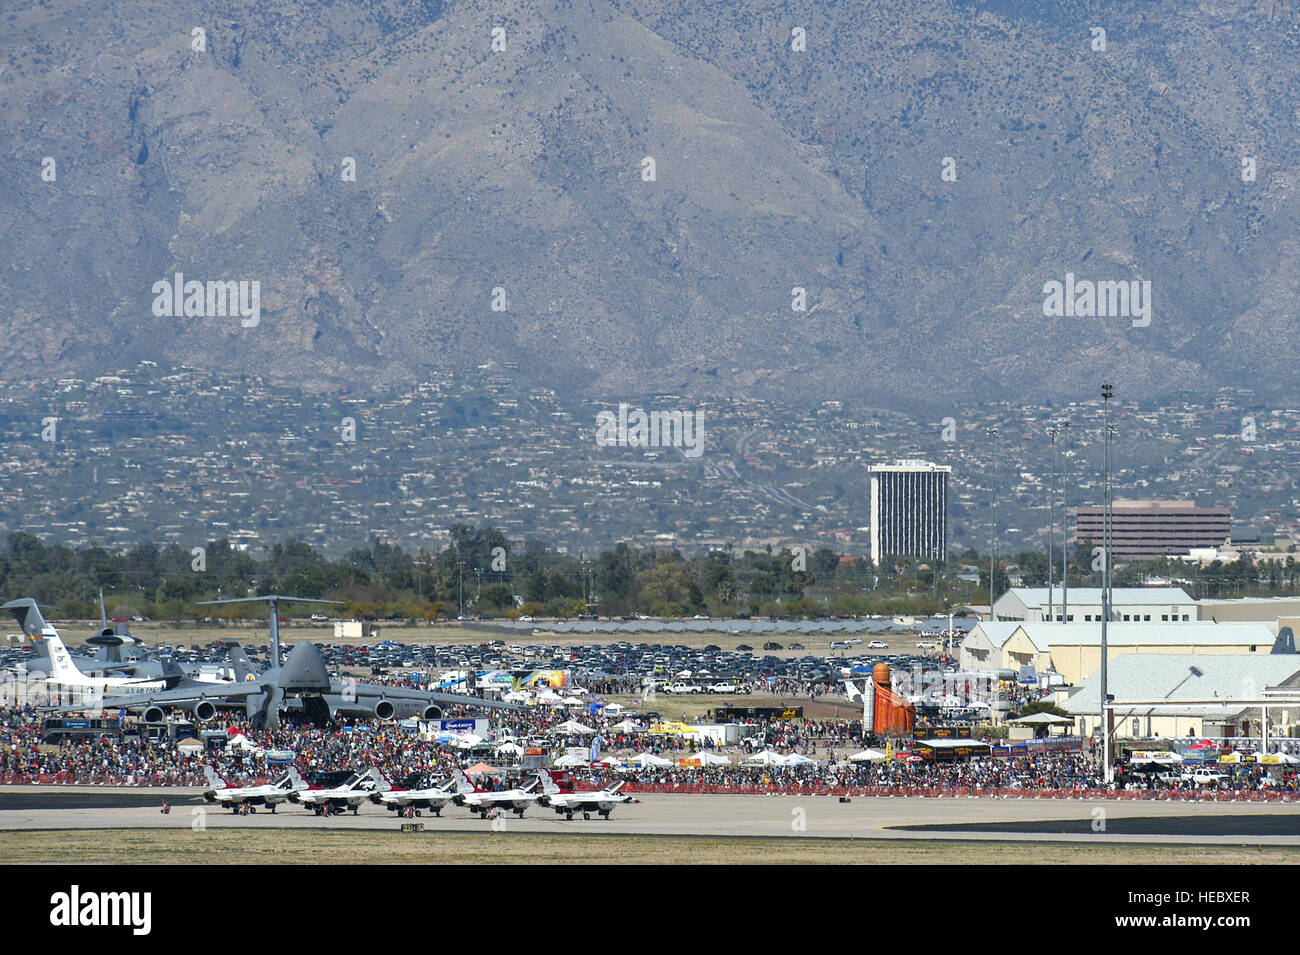 Thousands of attendees gather to watch aerial demonstrations and look at static displays on the flightline during the Thunder and Lightning over Arizona Open House at Davis-Monthan Air Force Base, Ariz., March 12, 2016.  The base opened its doors for the free event to showcase military air power and express appreciation for the local community's continuous support of D-M's missions. (U.S. Air Force photo by Senior Airman Chris Massey/Released) Stock Photo